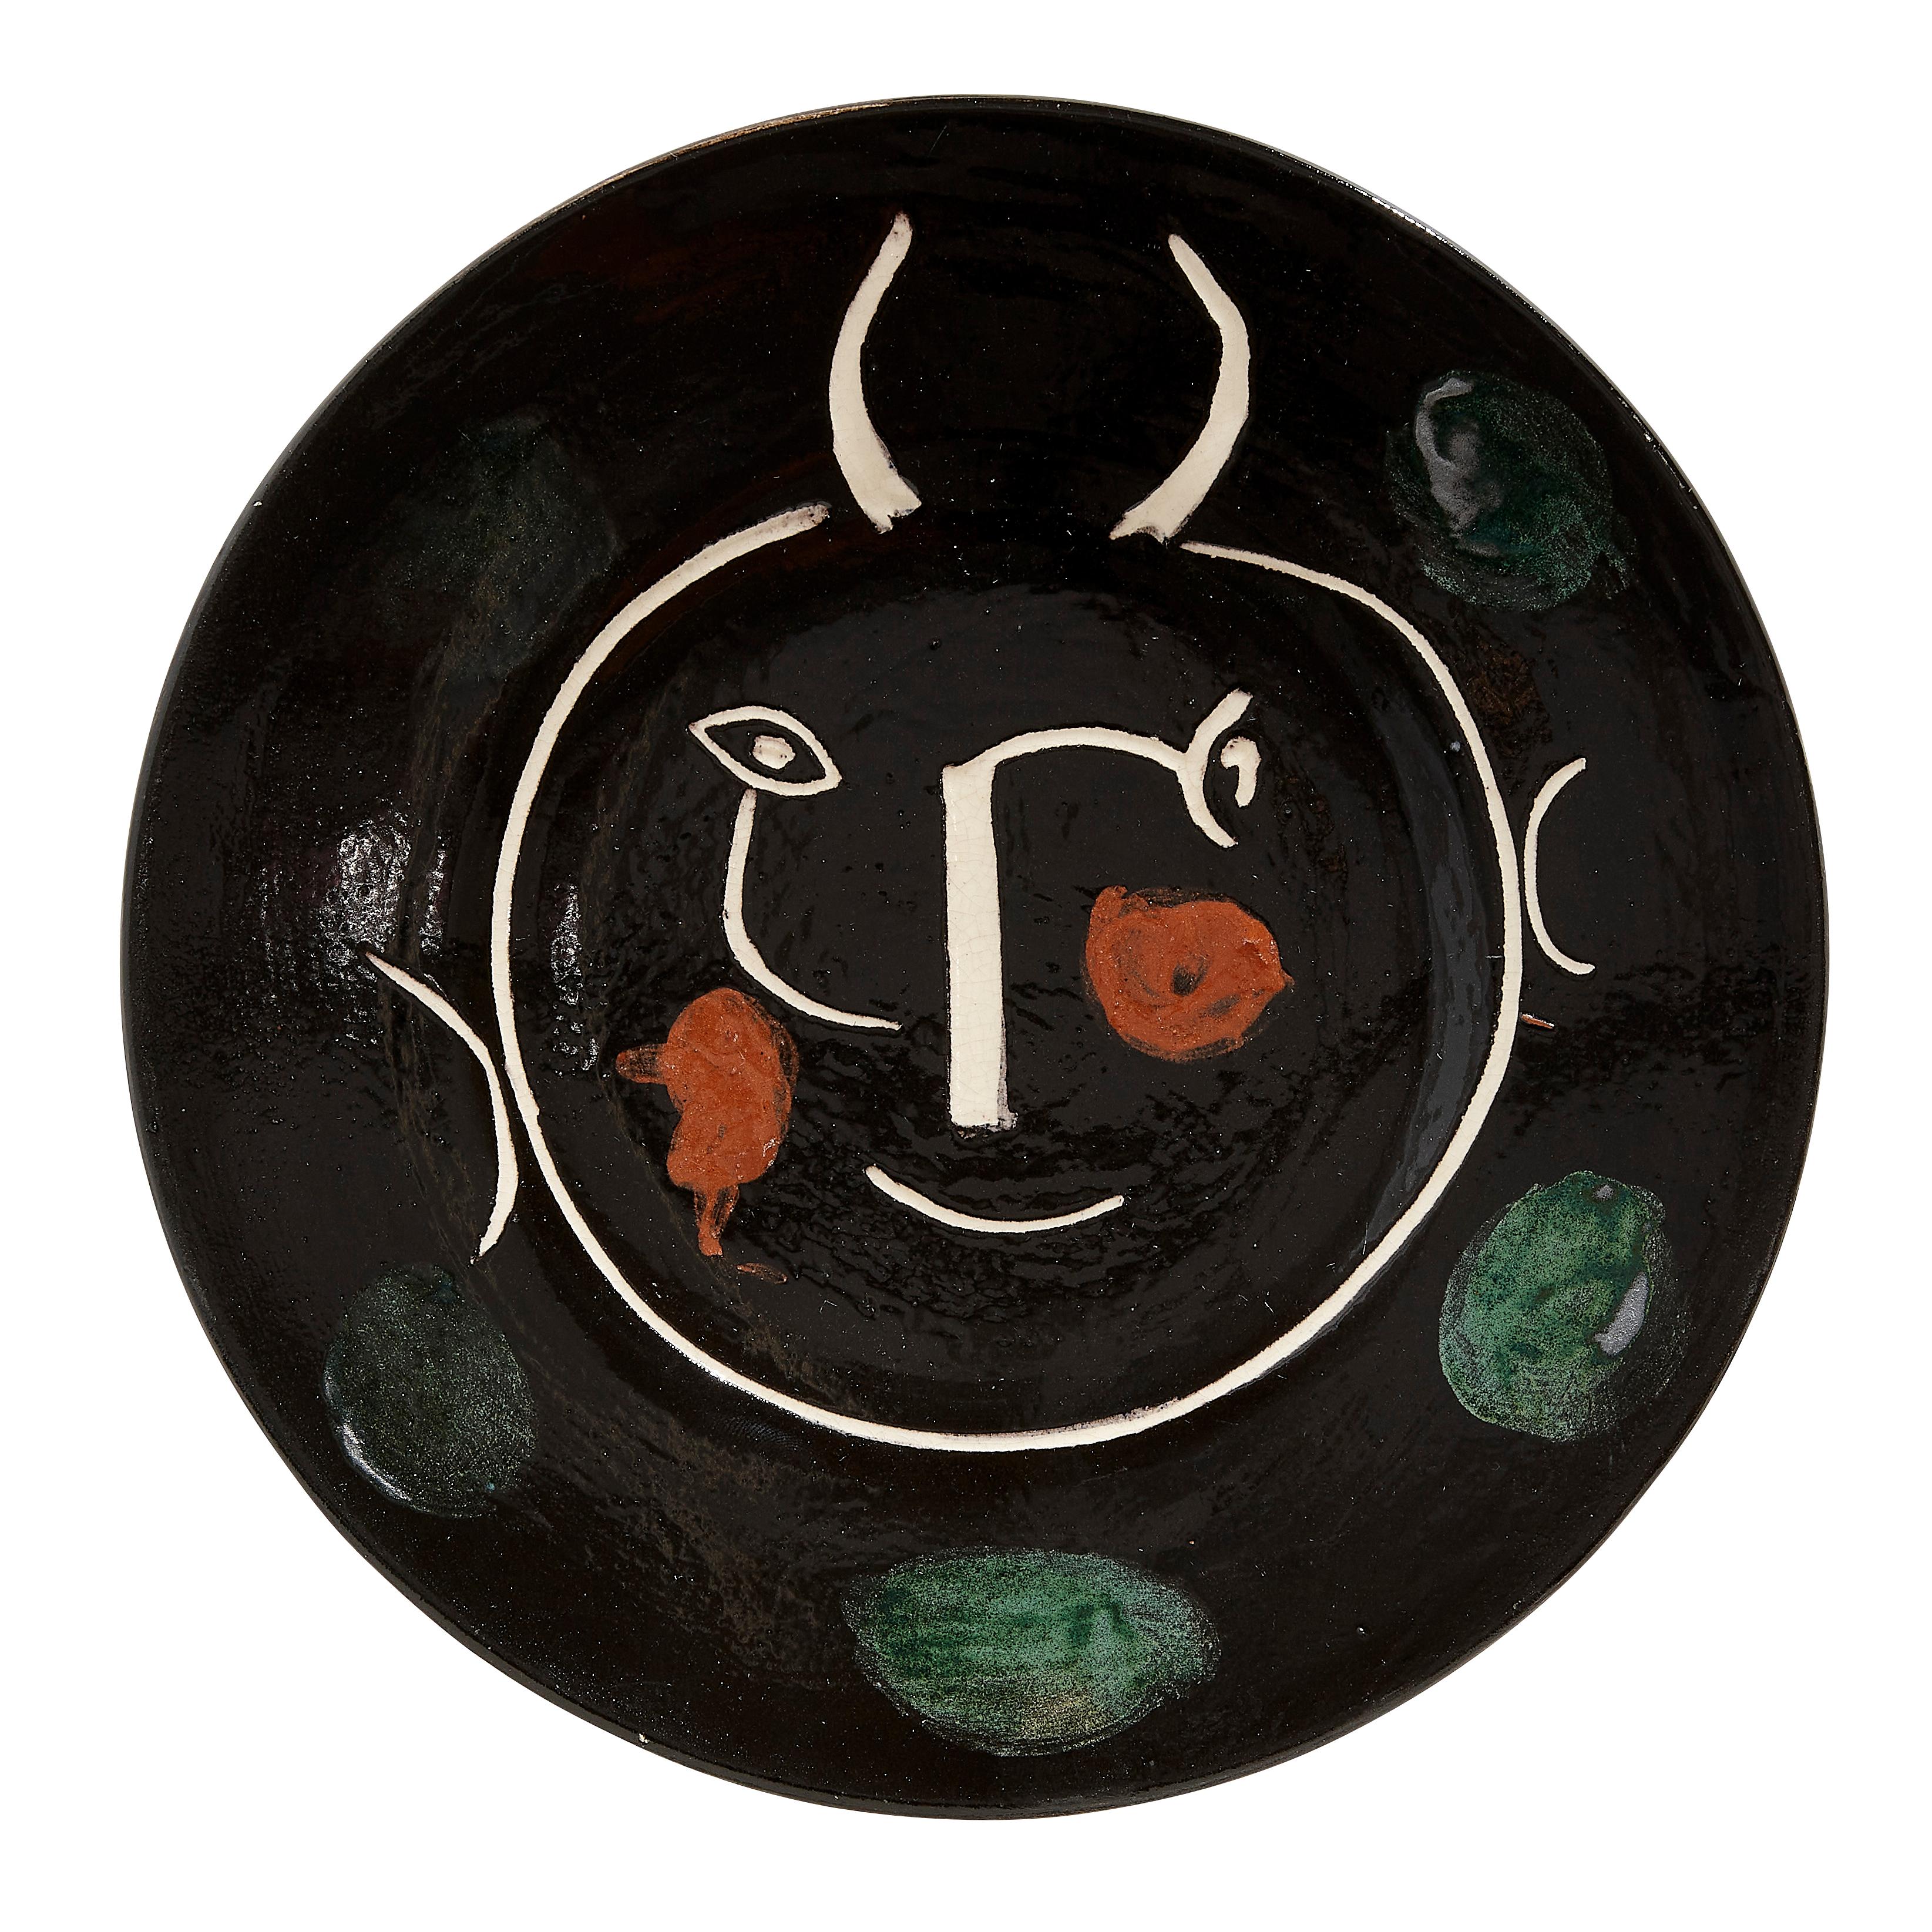 PABLO PICASSO (1881-1973) 
Service visage noir (A. R. 40)

Terre de faïence plate, painted in colors and glazed, 1948, from the edition of 100, inscribed 'E', 'd'apres Picasso' and 'Madoura', with the Madoura stamp.